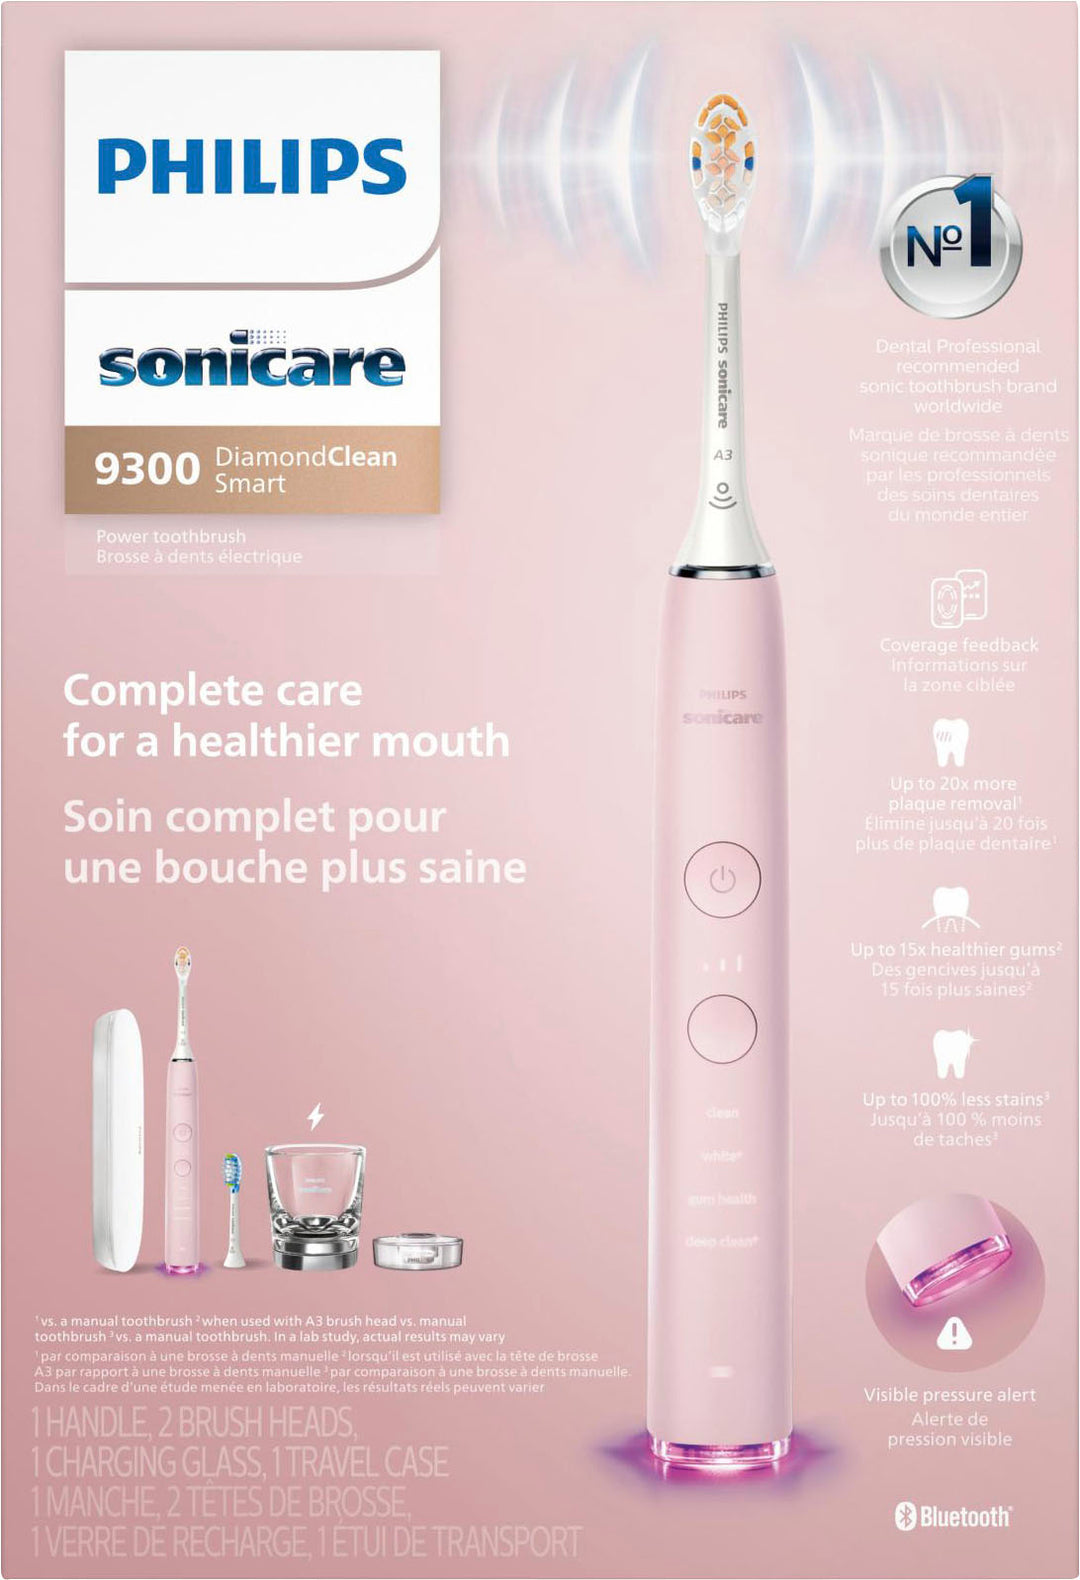 Philips Sonicare DiamondClean Smart Electric, Rechargeable Toothbrush for Complete Oral Care – 9300 Series - Pink_0